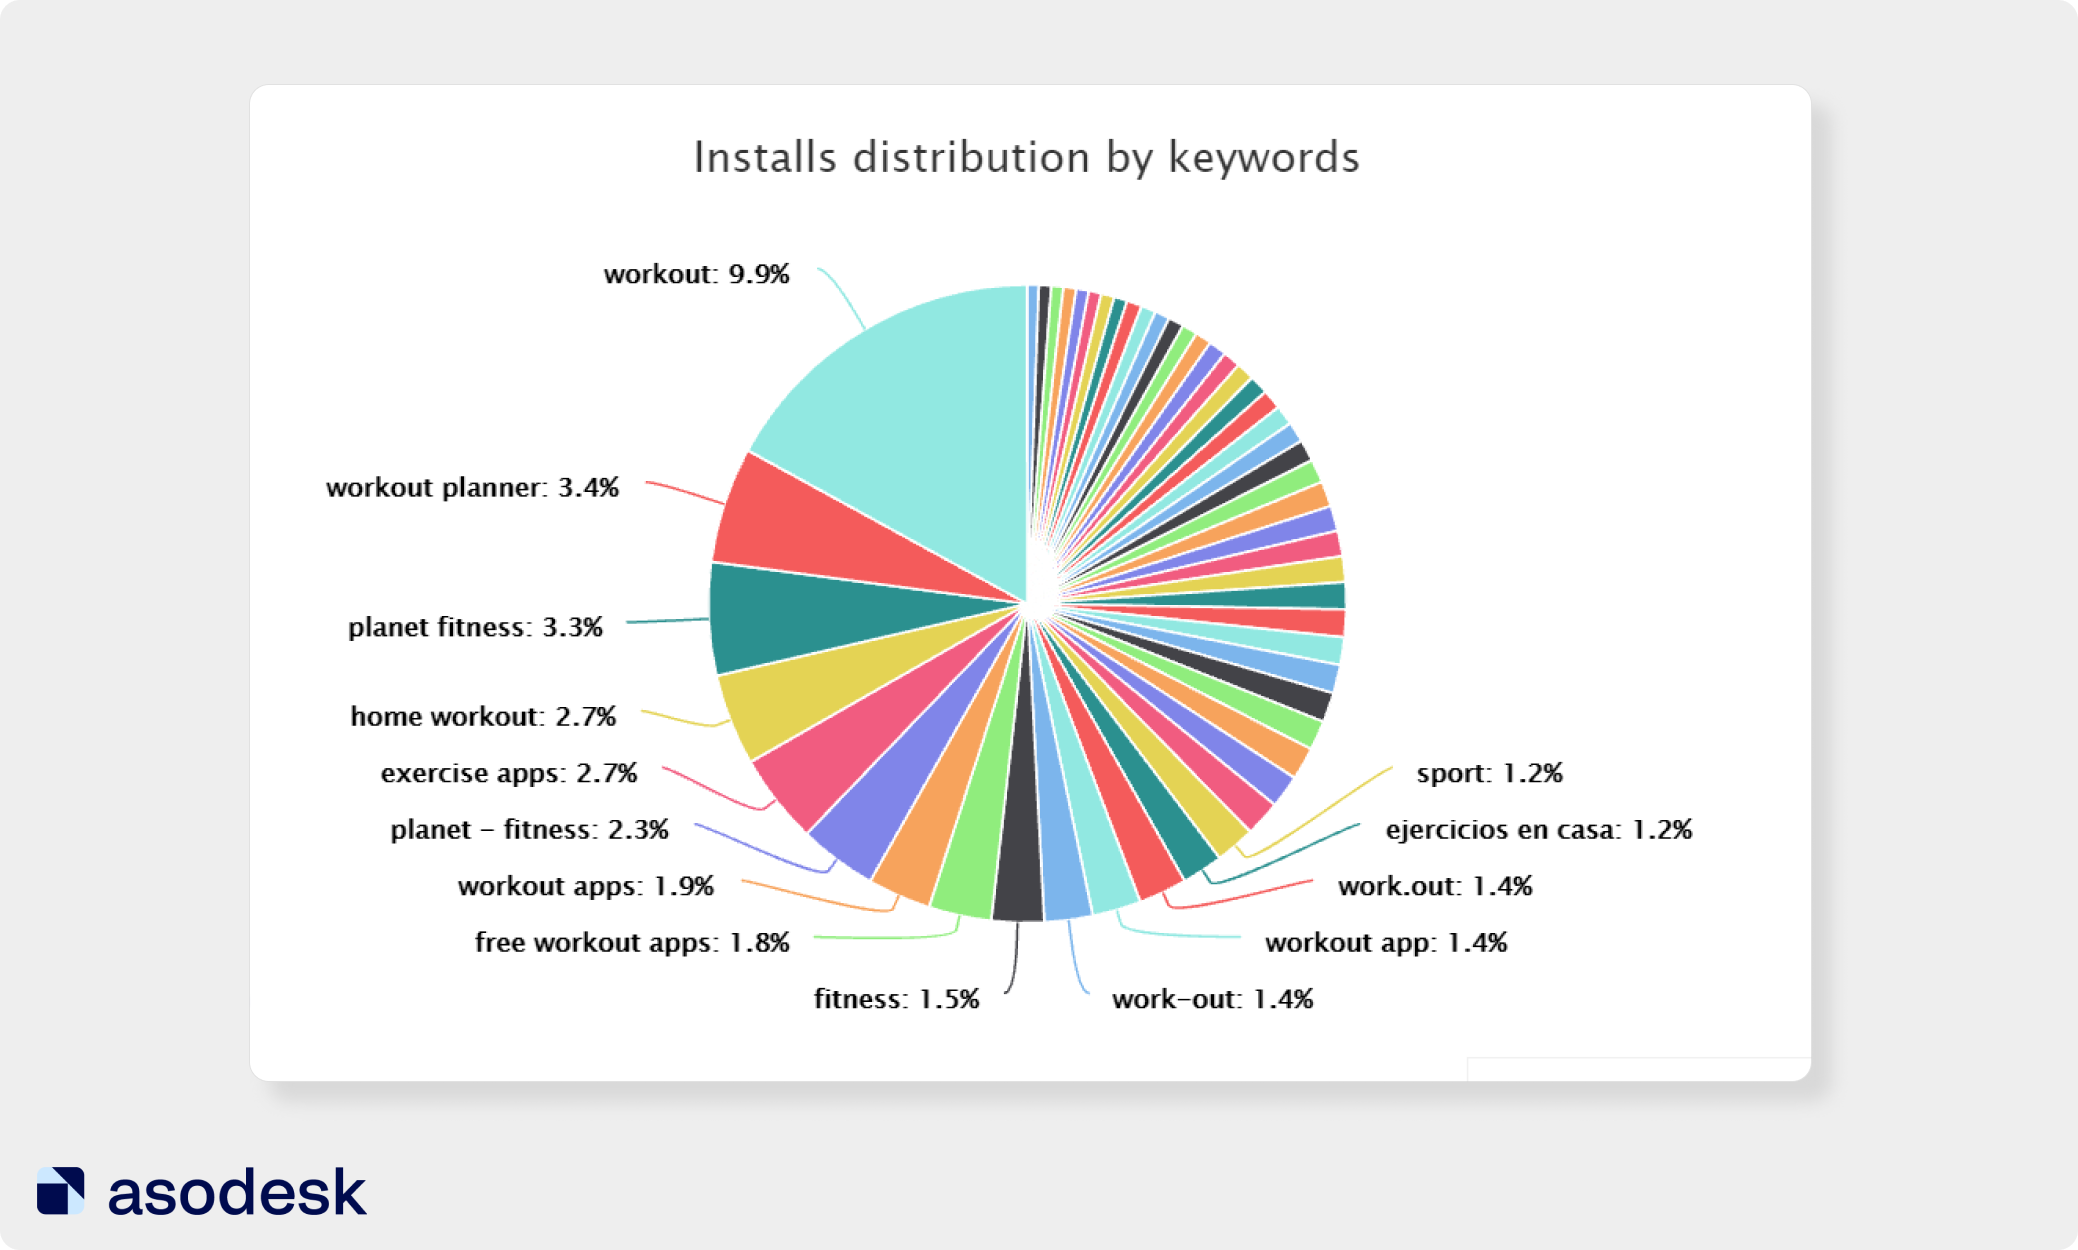 Organic Report shows the share of installs by keyword on a convenient chart